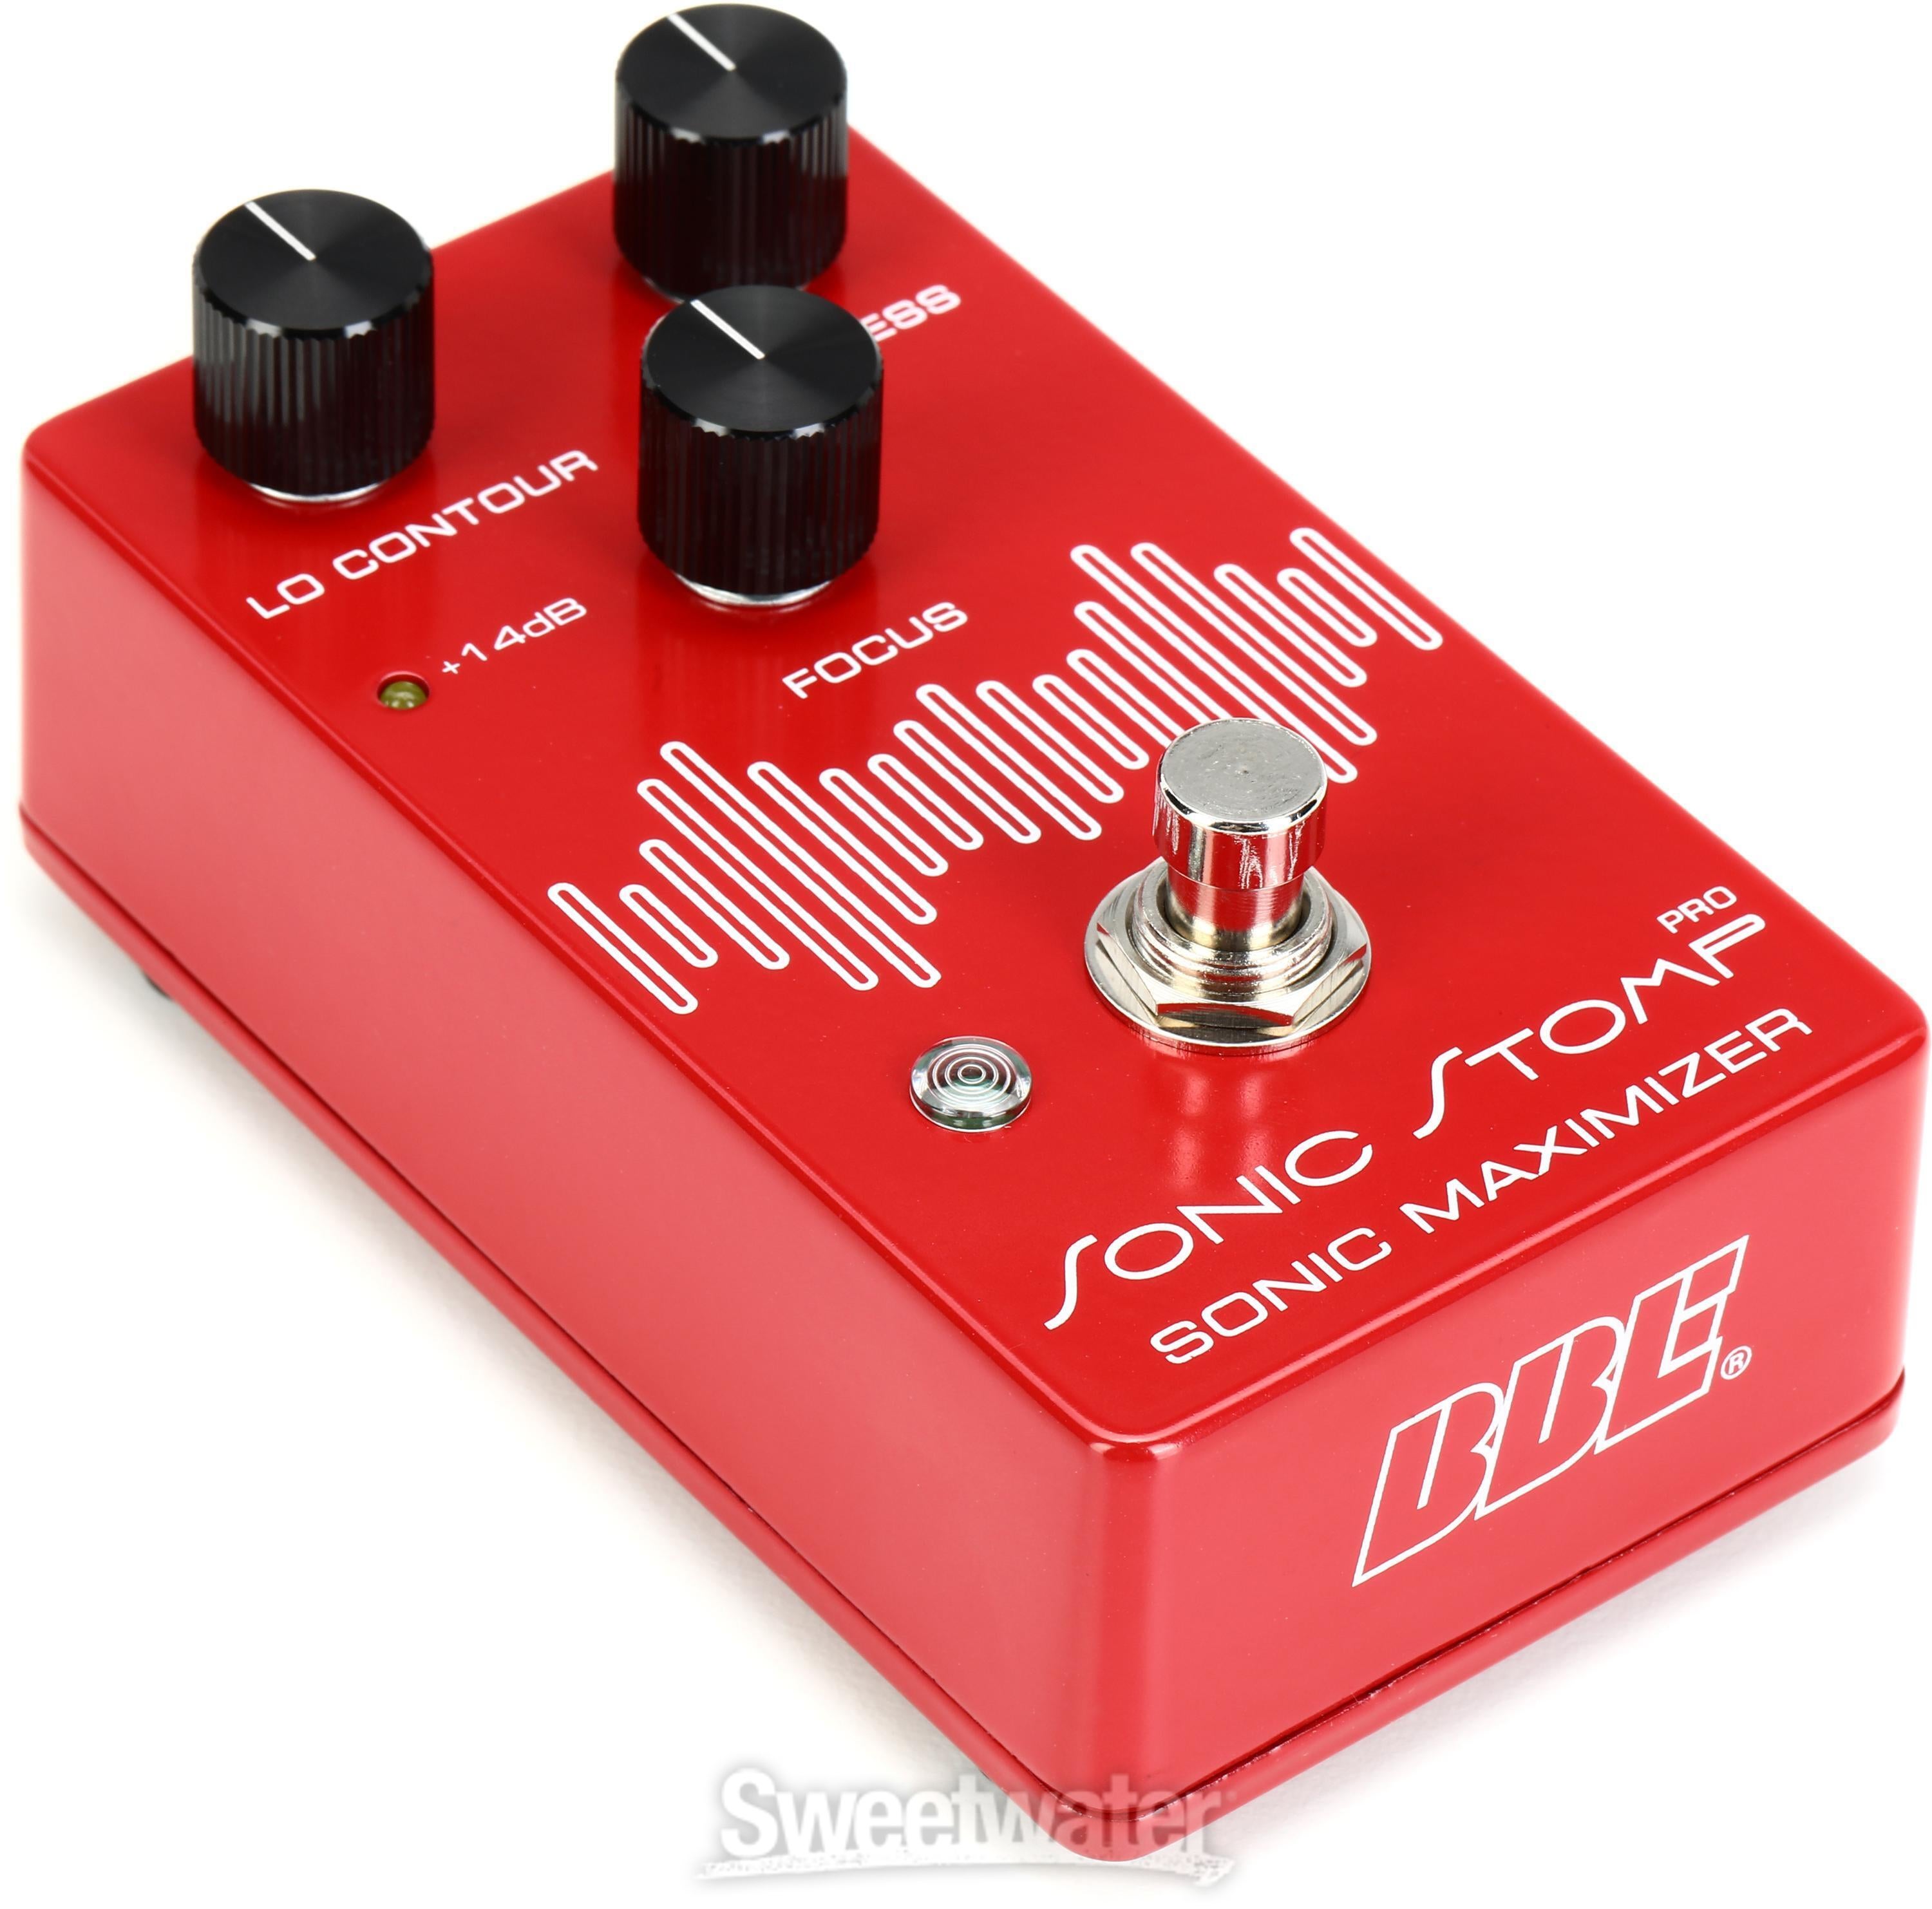 BBE Sonic Stomp Pro Sonic Maximizer Pedal Reviews | Sweetwater